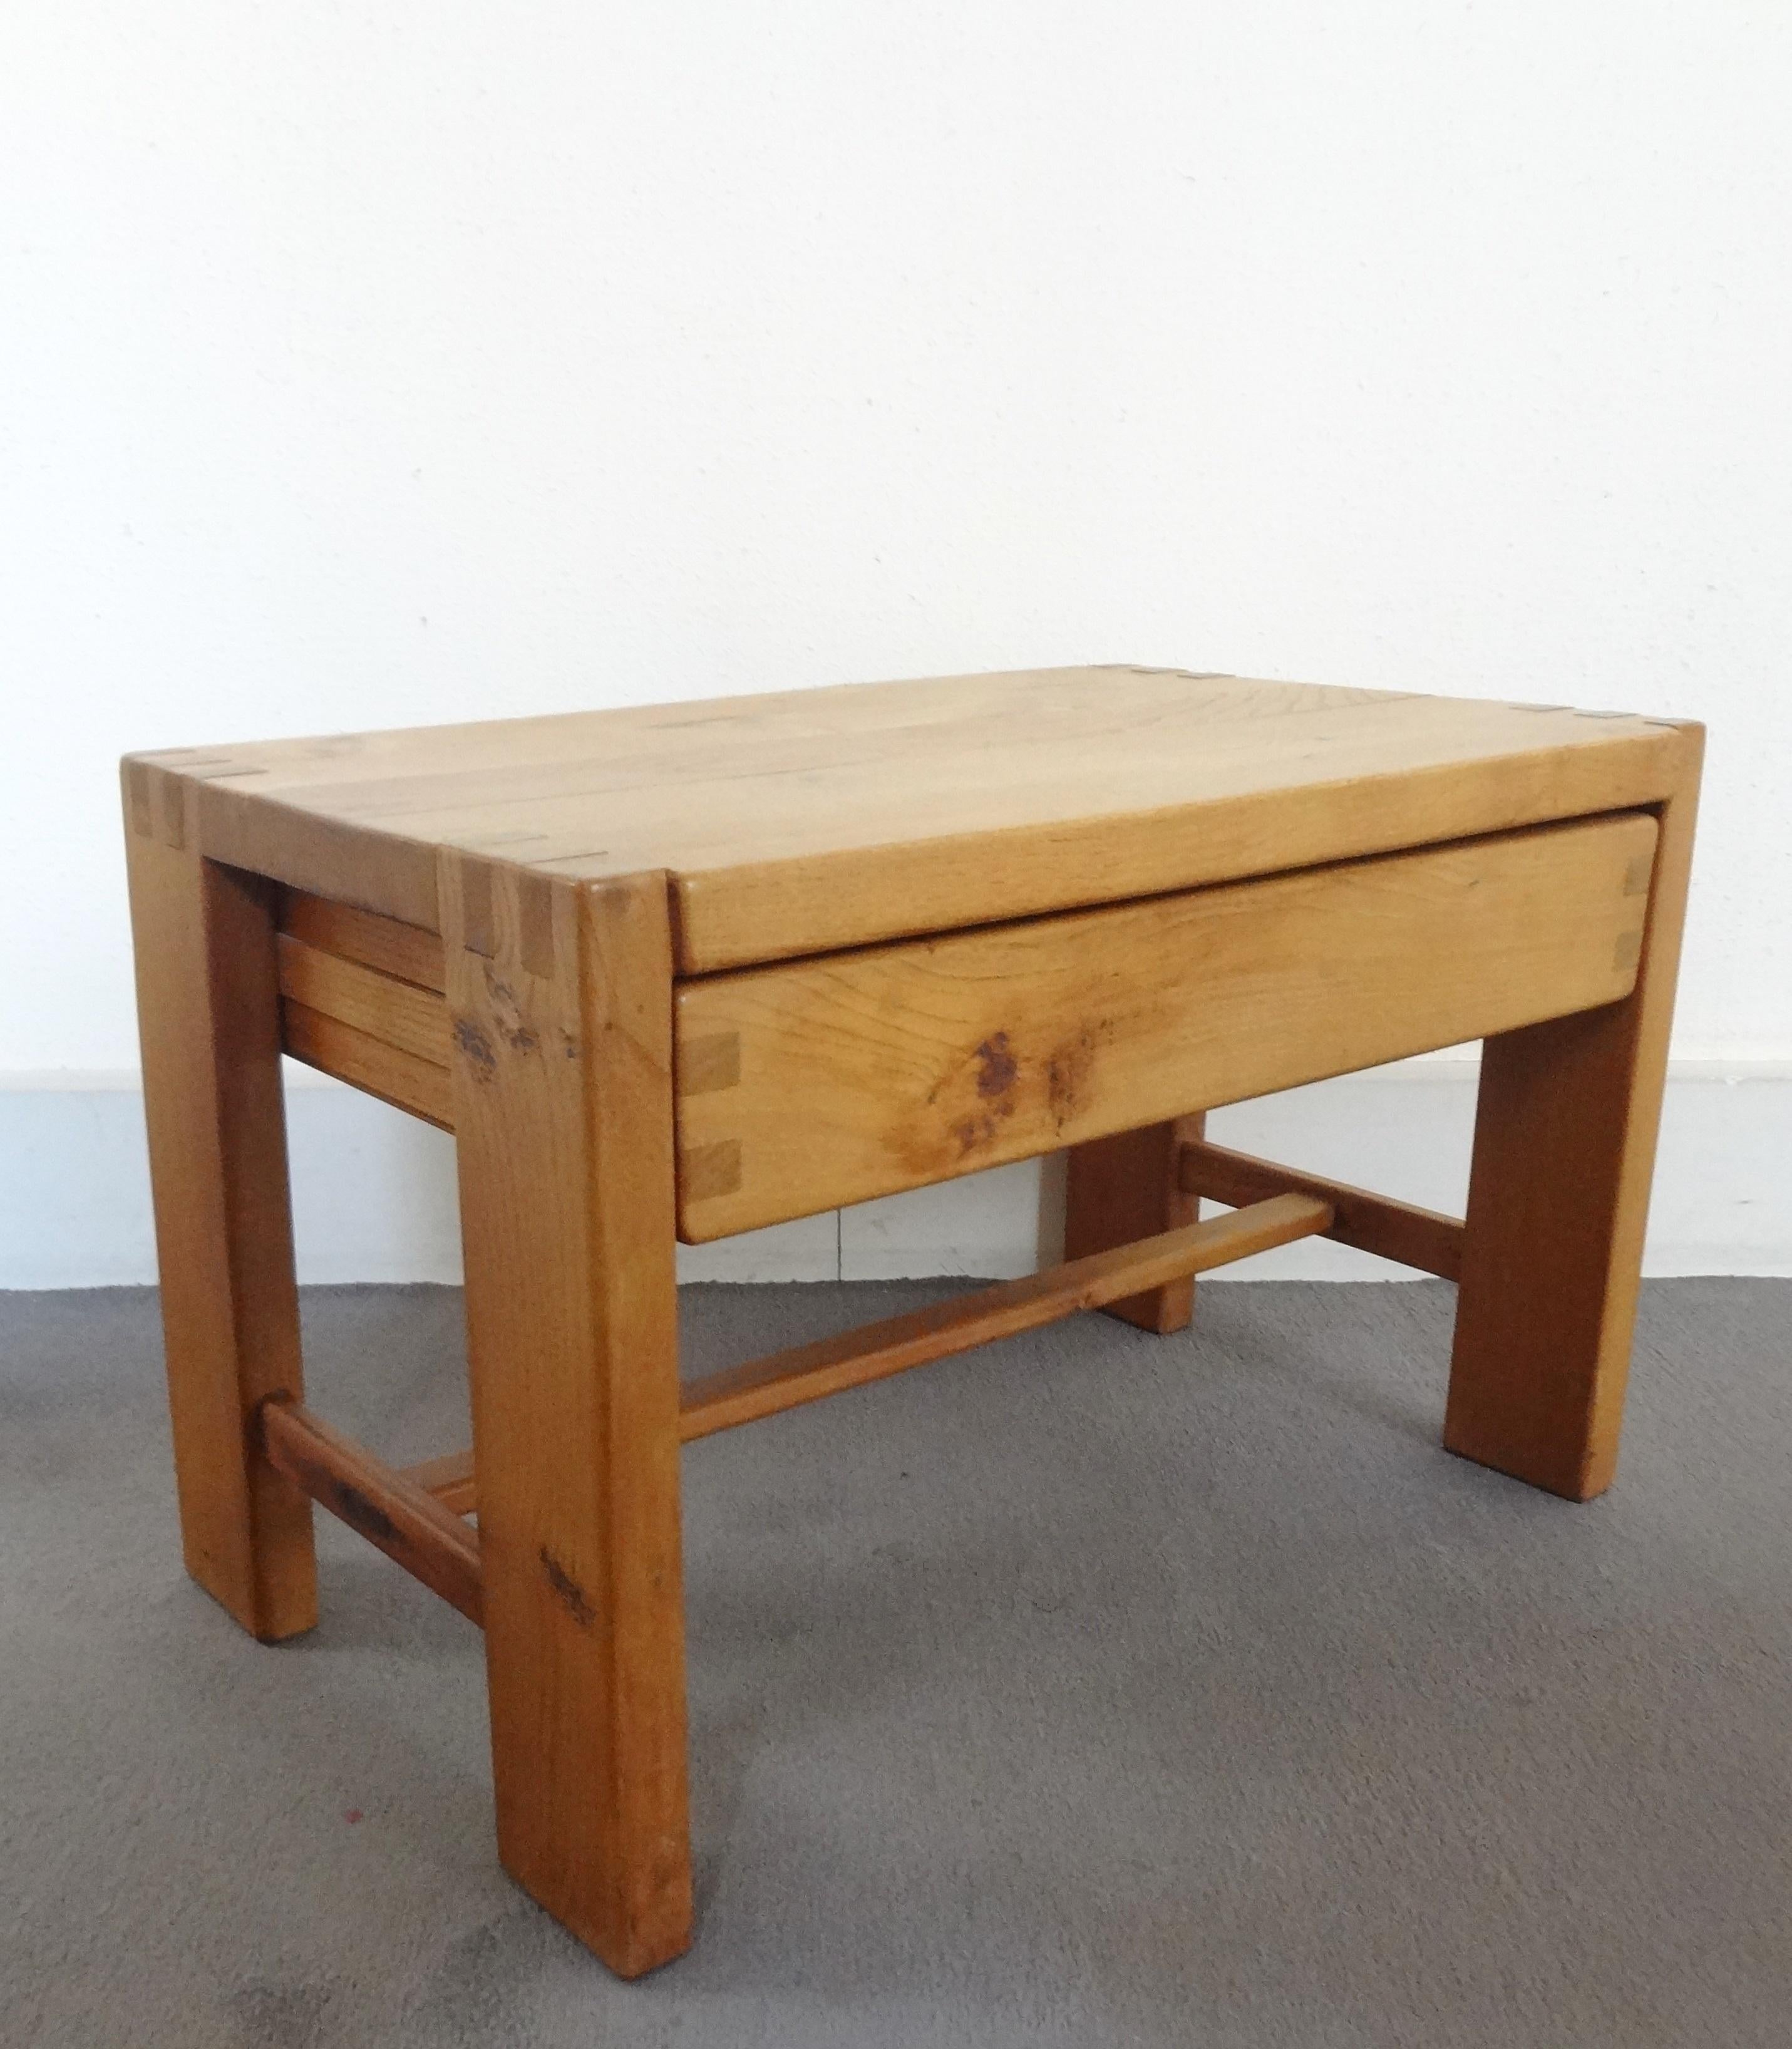 Pierre Chapo (1927-1987)
Little rectangular solid elm T7 side-table, 1960s
With one large drawer. H cross-bar base.
Apparent mortise and tenon assemblage.

Pierre Chapo (1927-1987), cabinetmaker and designer, familiar with architecture,